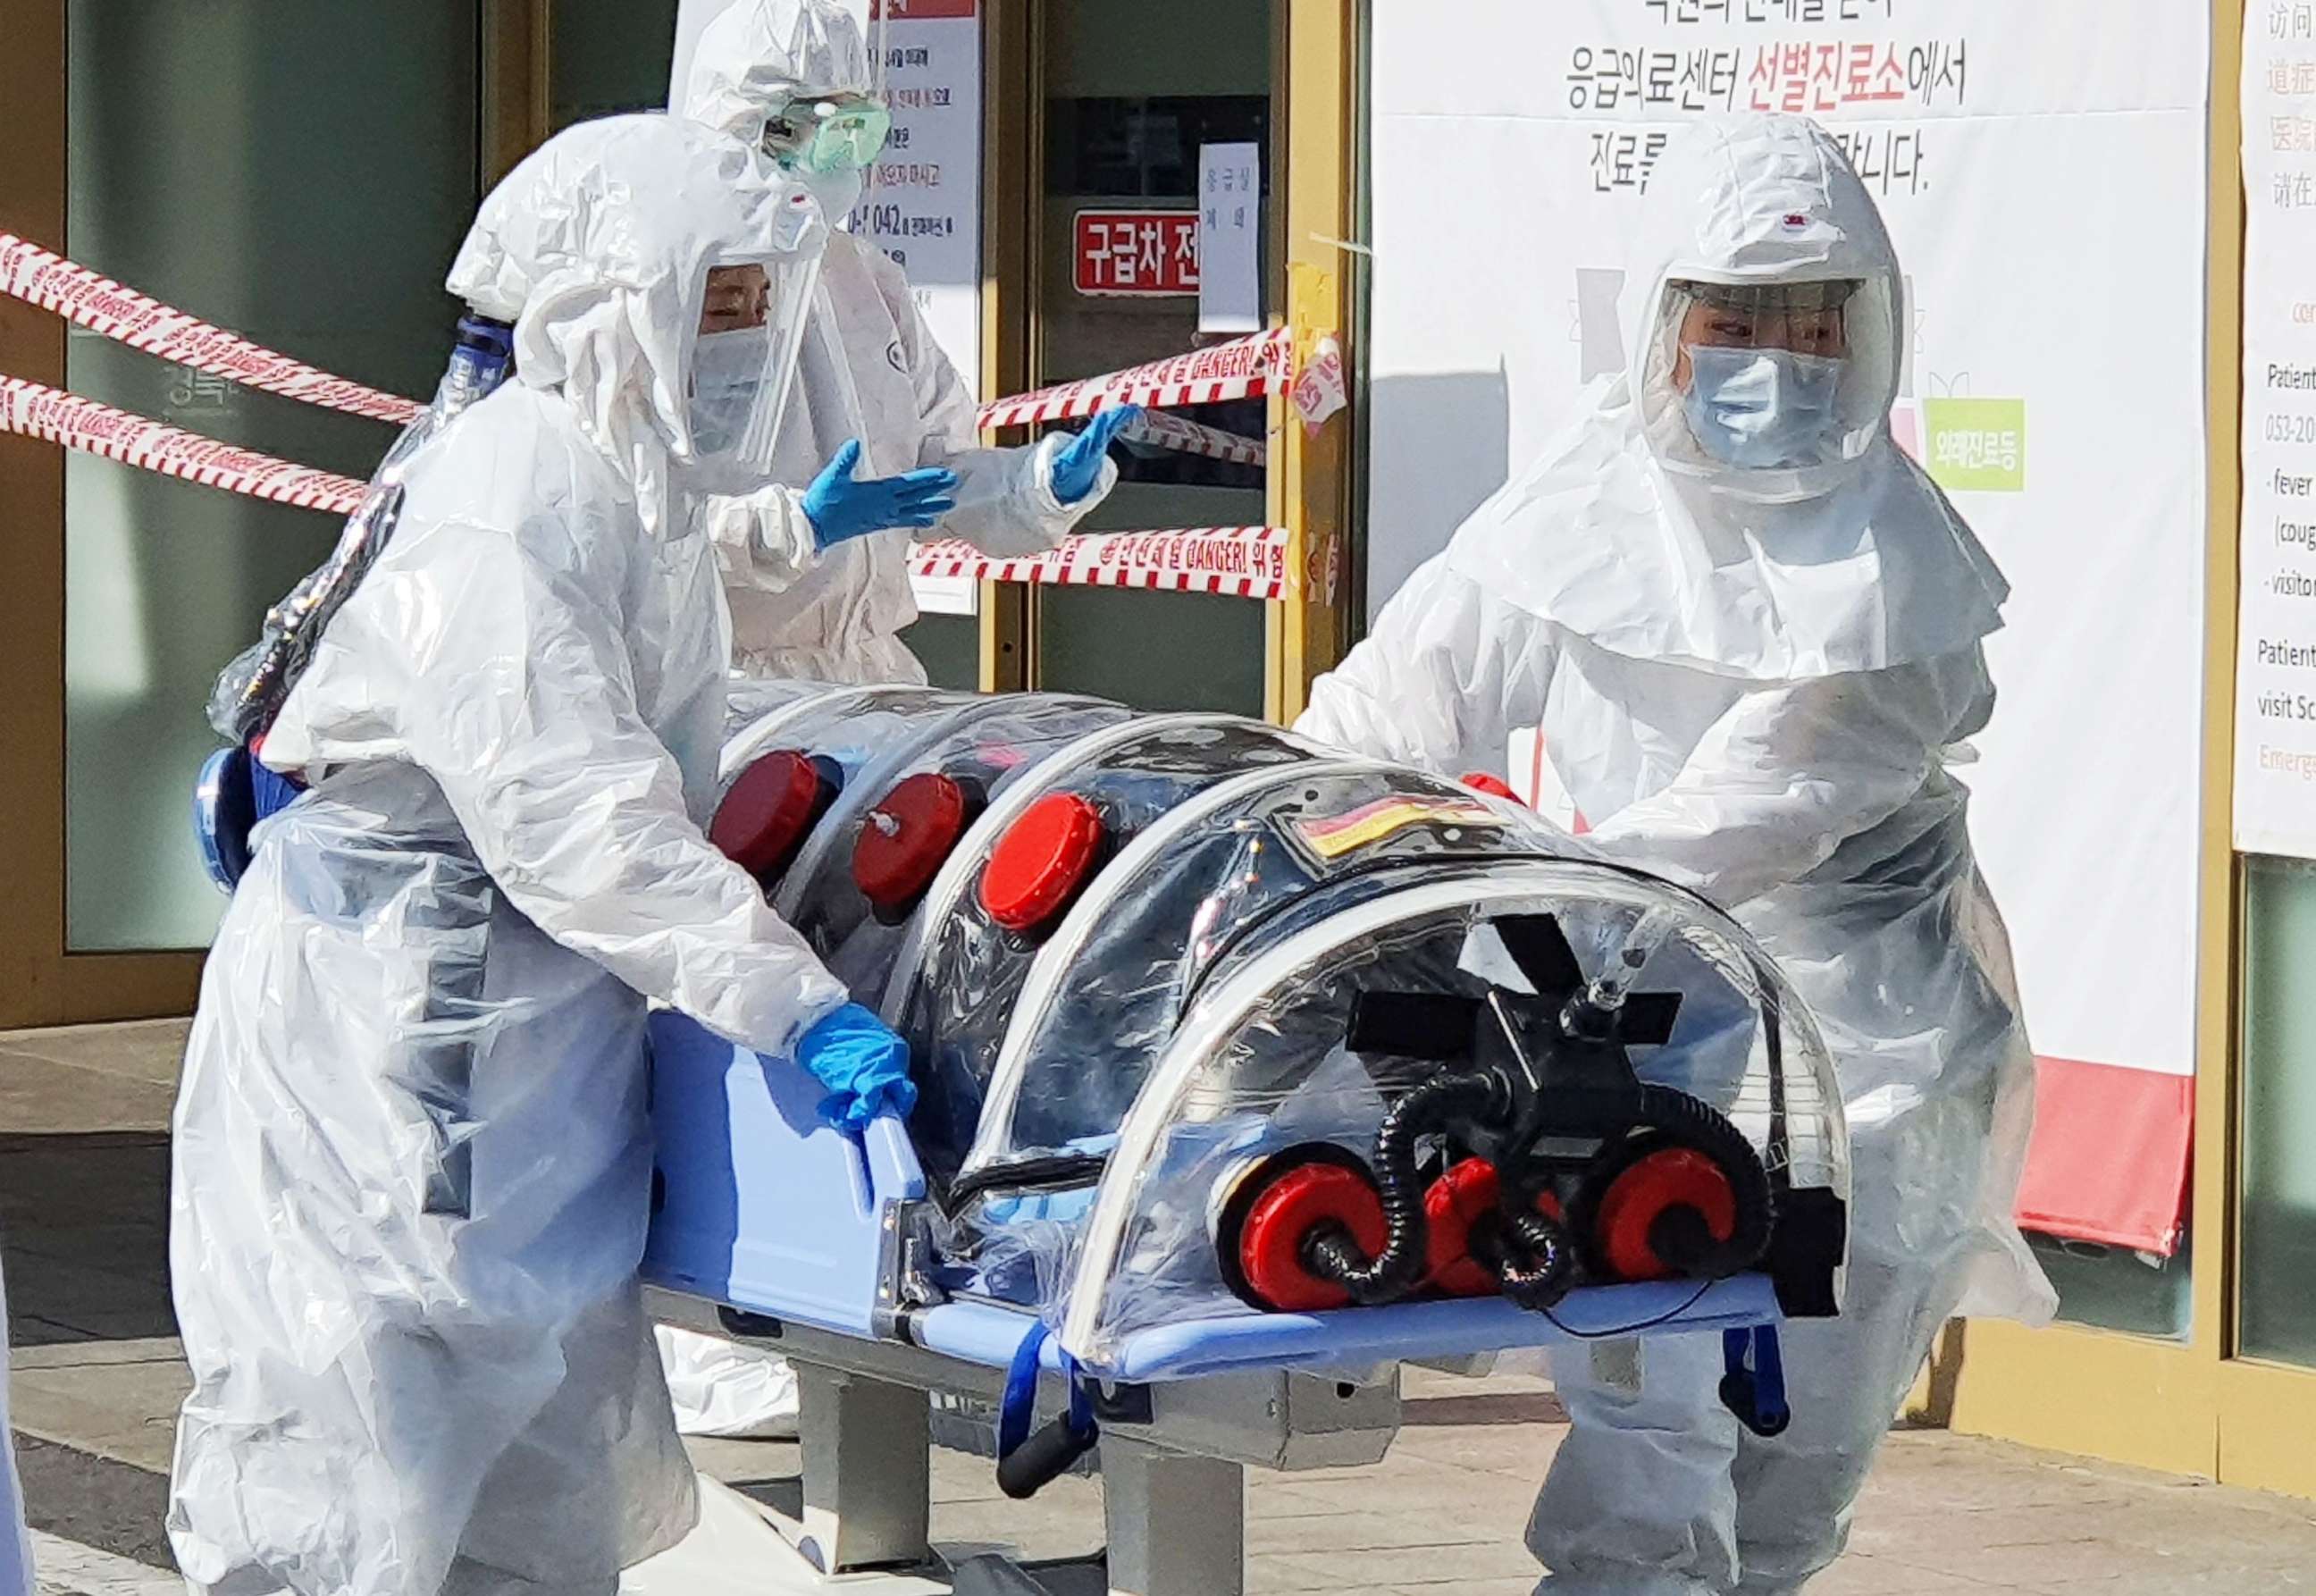 PHOTO:A patient suspected of carrying the new coronavirus, COVID-19, arrives at Kyungpook National University Hospital in Daegu, South Korea, Feb. 19, 2020.